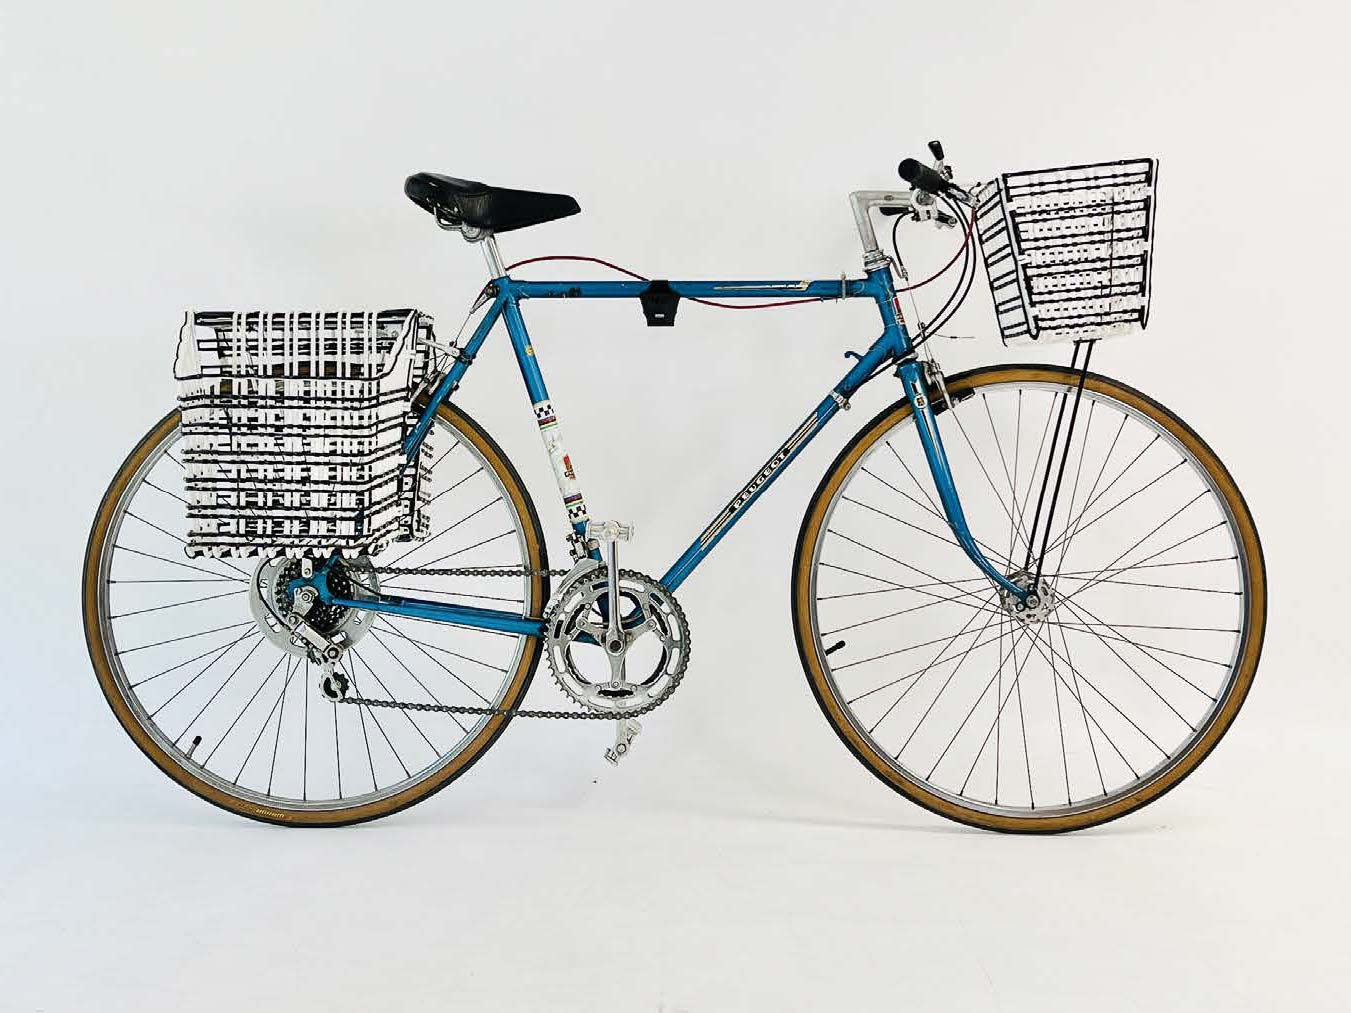 A side-view of a bicycle with a front basket and a pair of rear baskets.